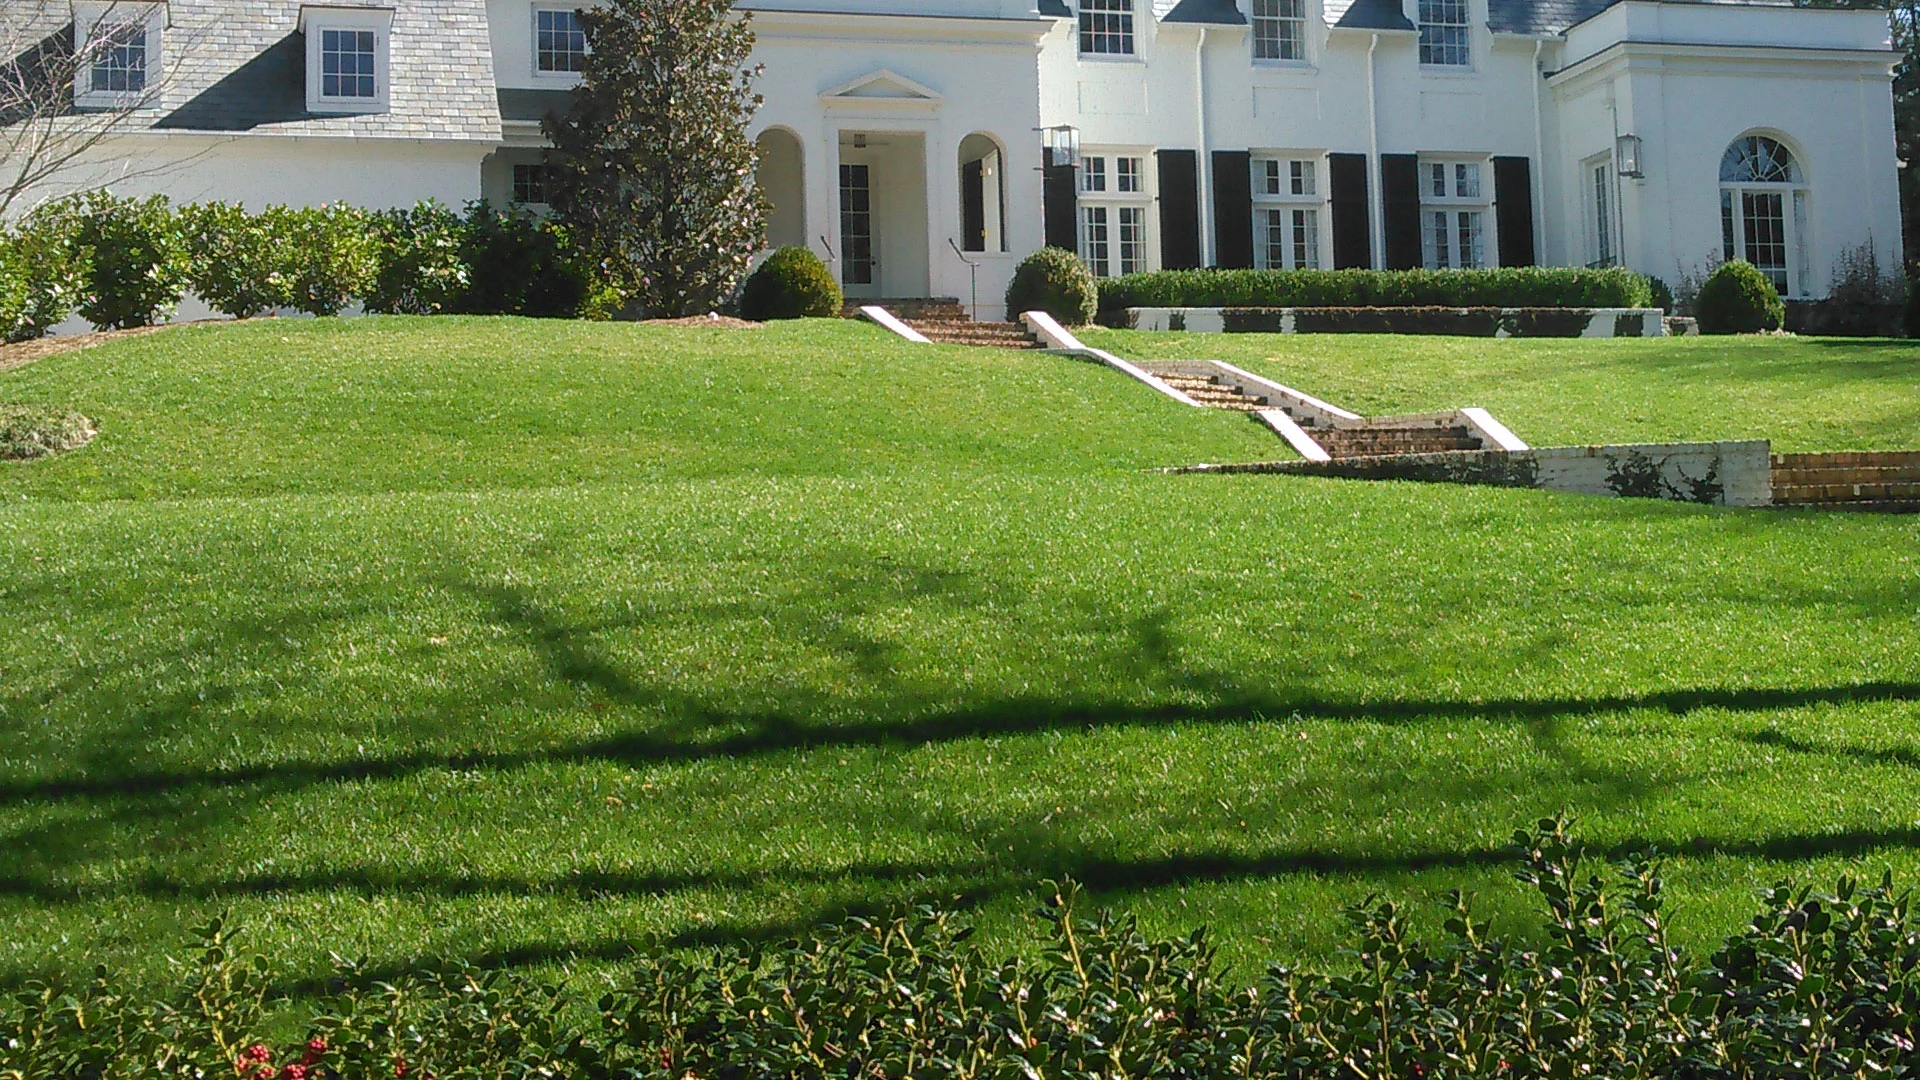 This green healthy lawn was aerated and over seeded during the spring time.